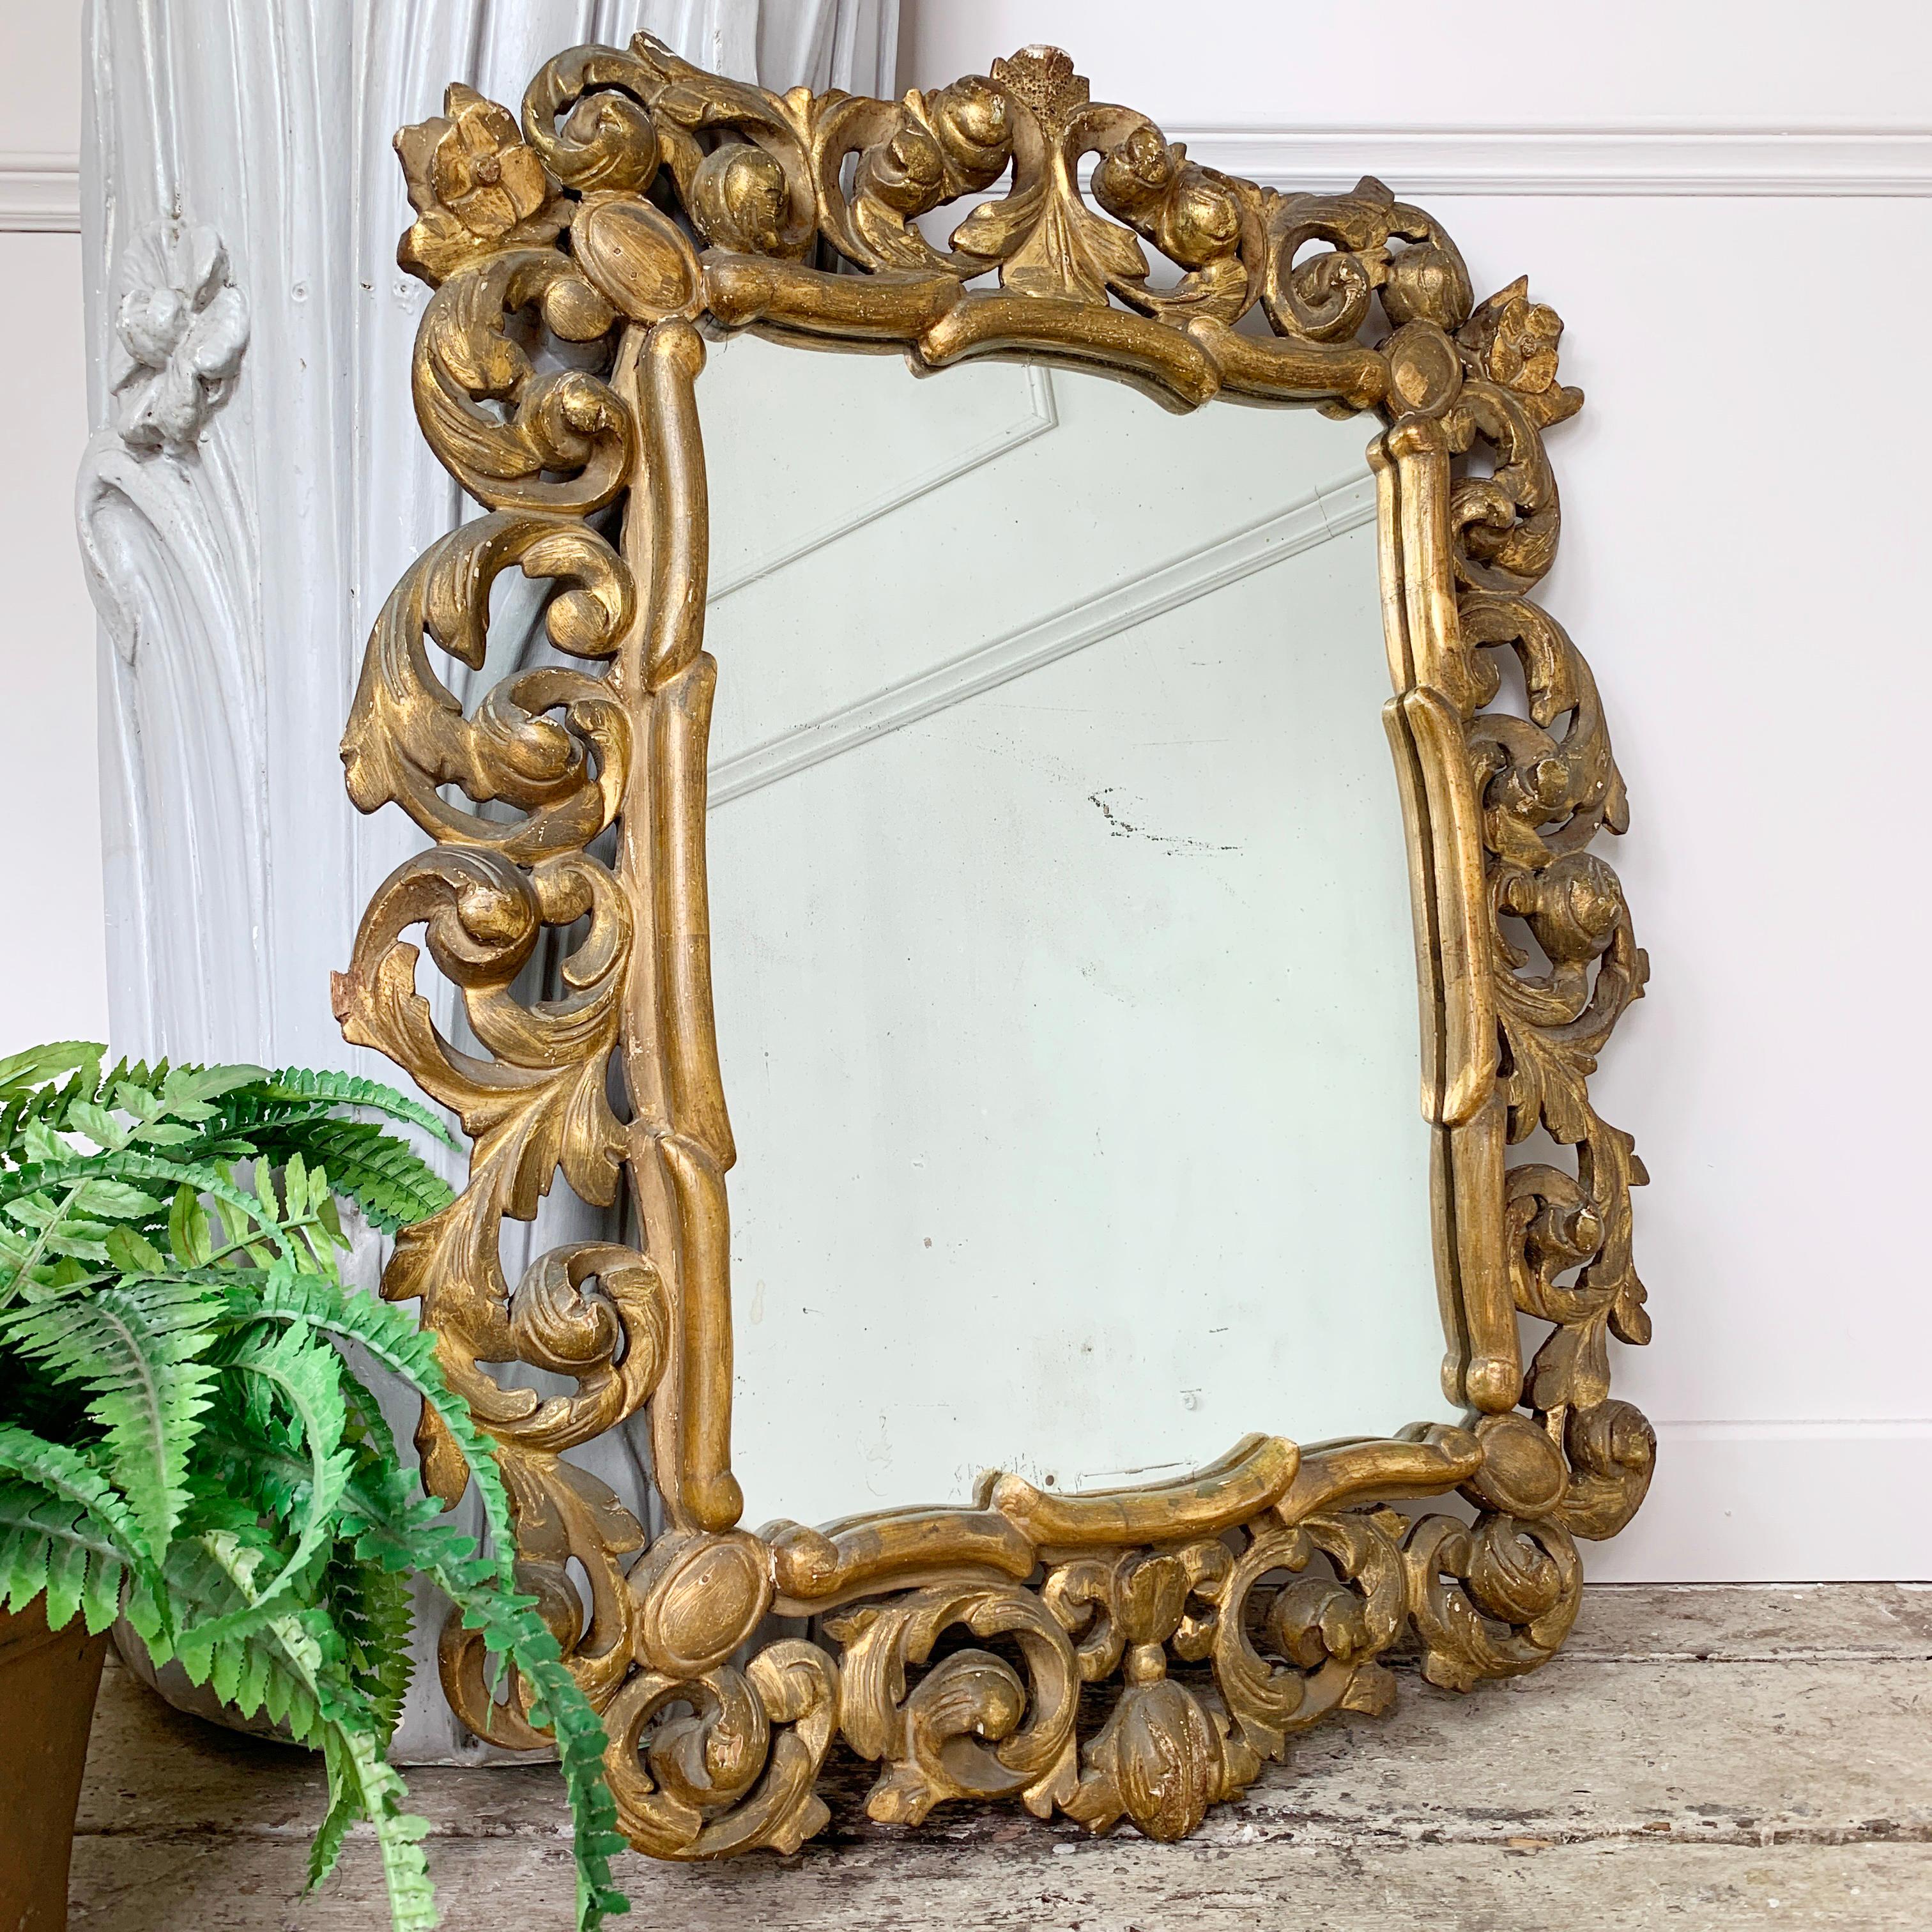 Italian gilt carved wooden mirror, c 1830's
Deeply carved baroque style acanthus leaves and detailing. Original Gilt finished the carved wood
87.5cm height, 73cm width, 6.5cm depth, mirror glass 56cm height x 41cm width
Hanging hook on the